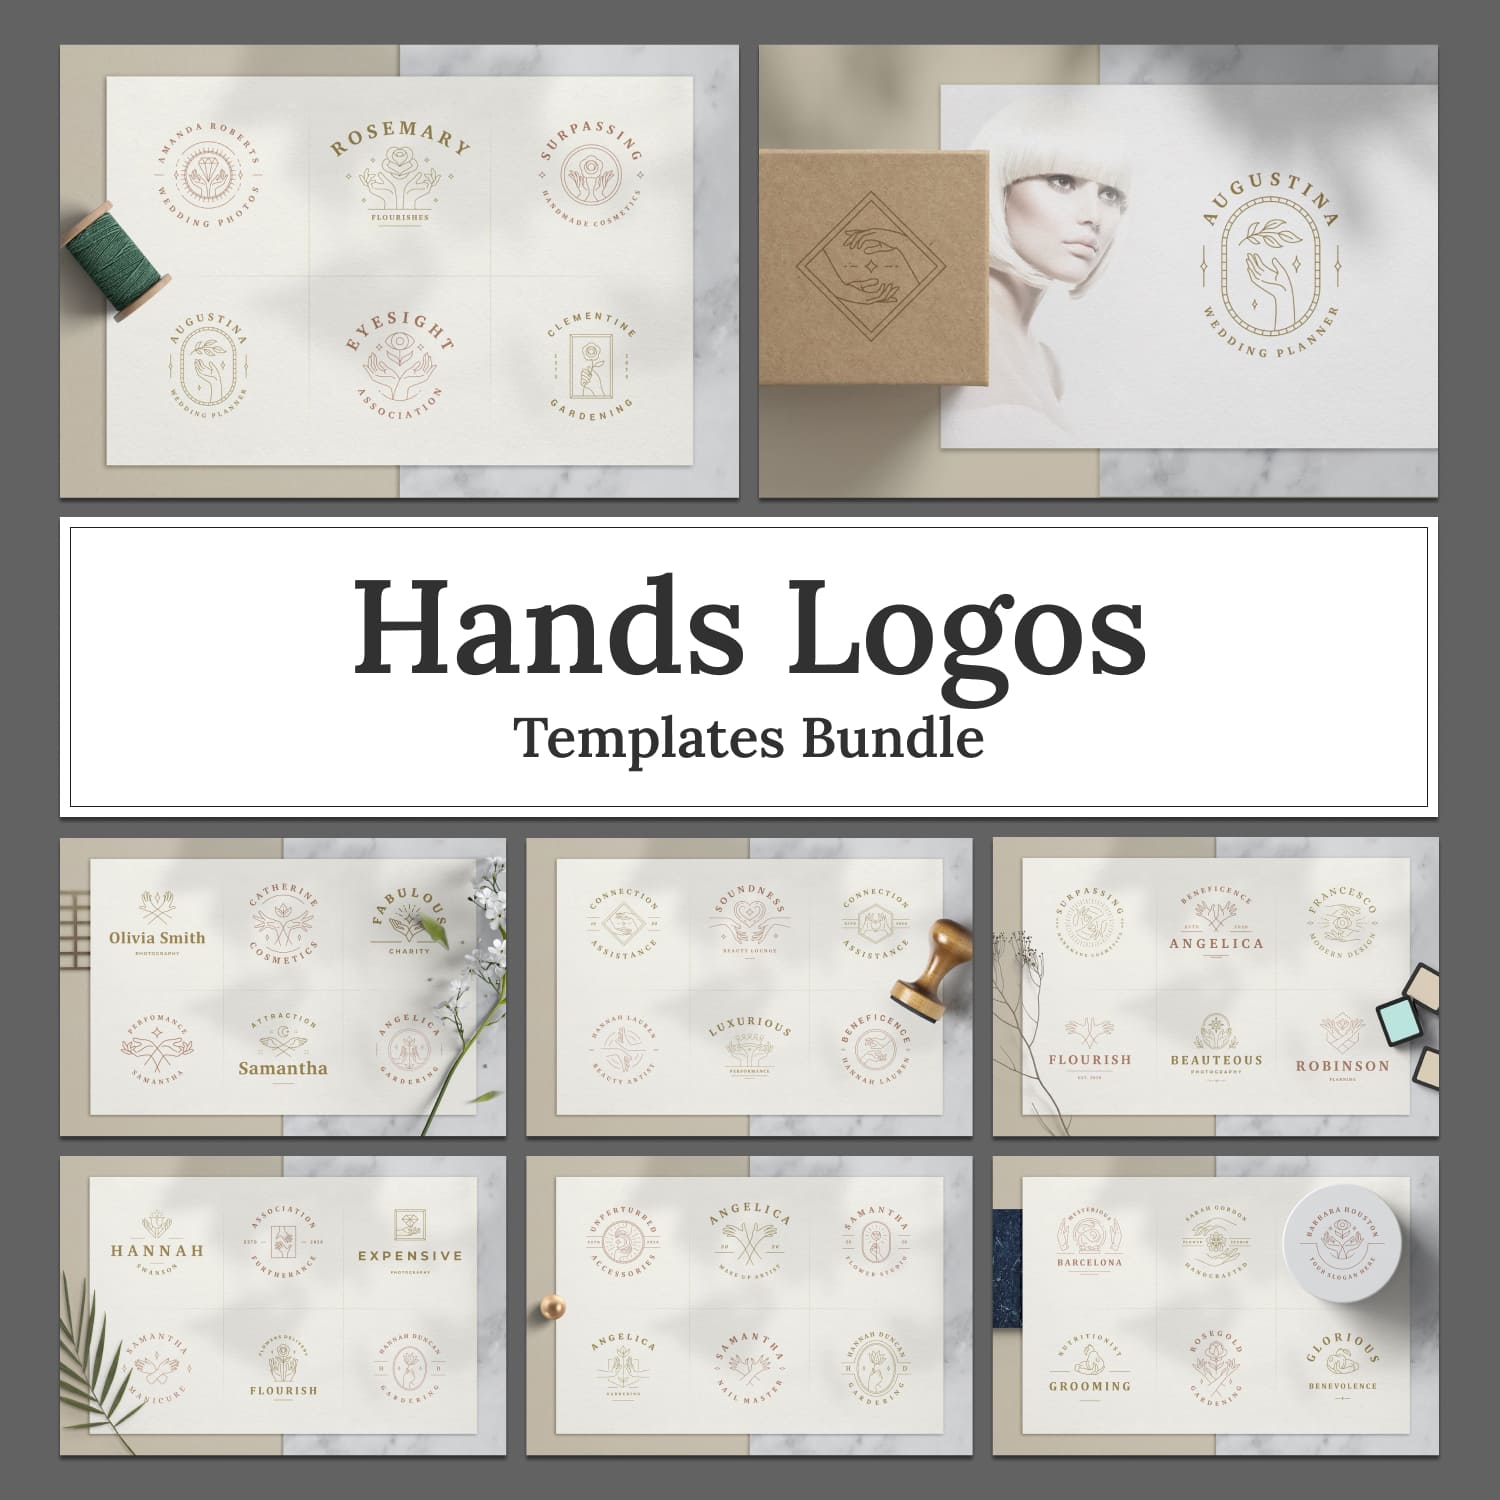 Hands Logos Editable Templates And Illustrations Bundle cover image.